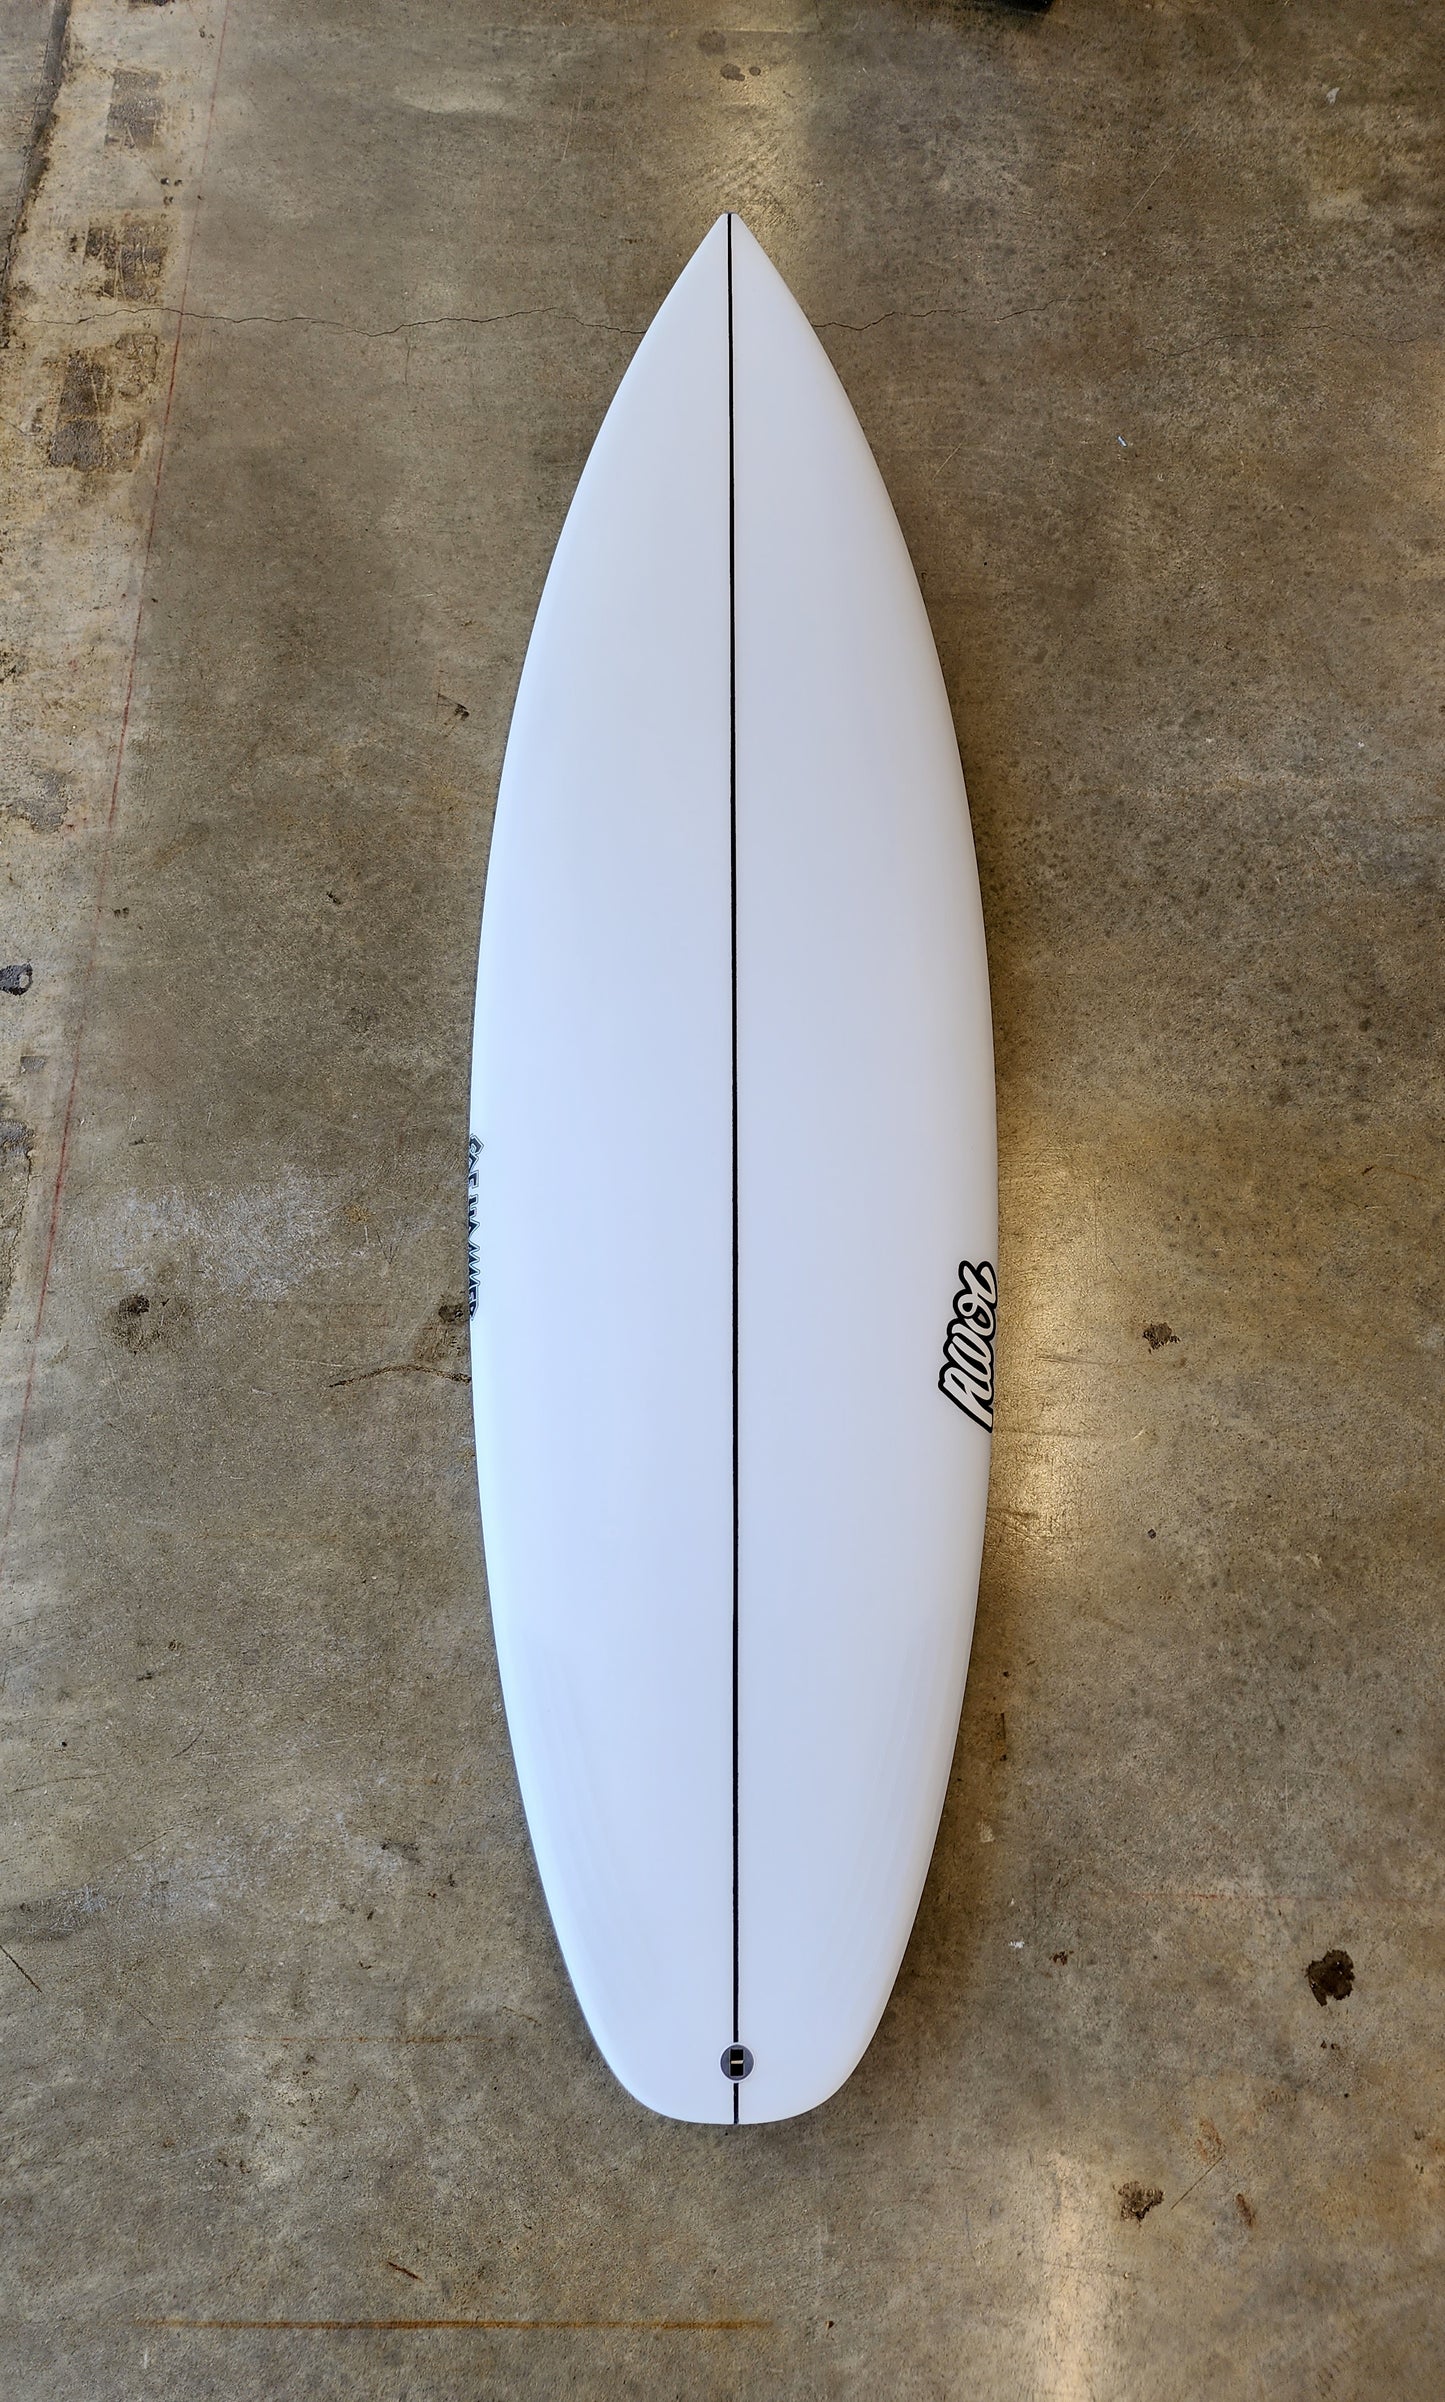 AWOL Surfboards